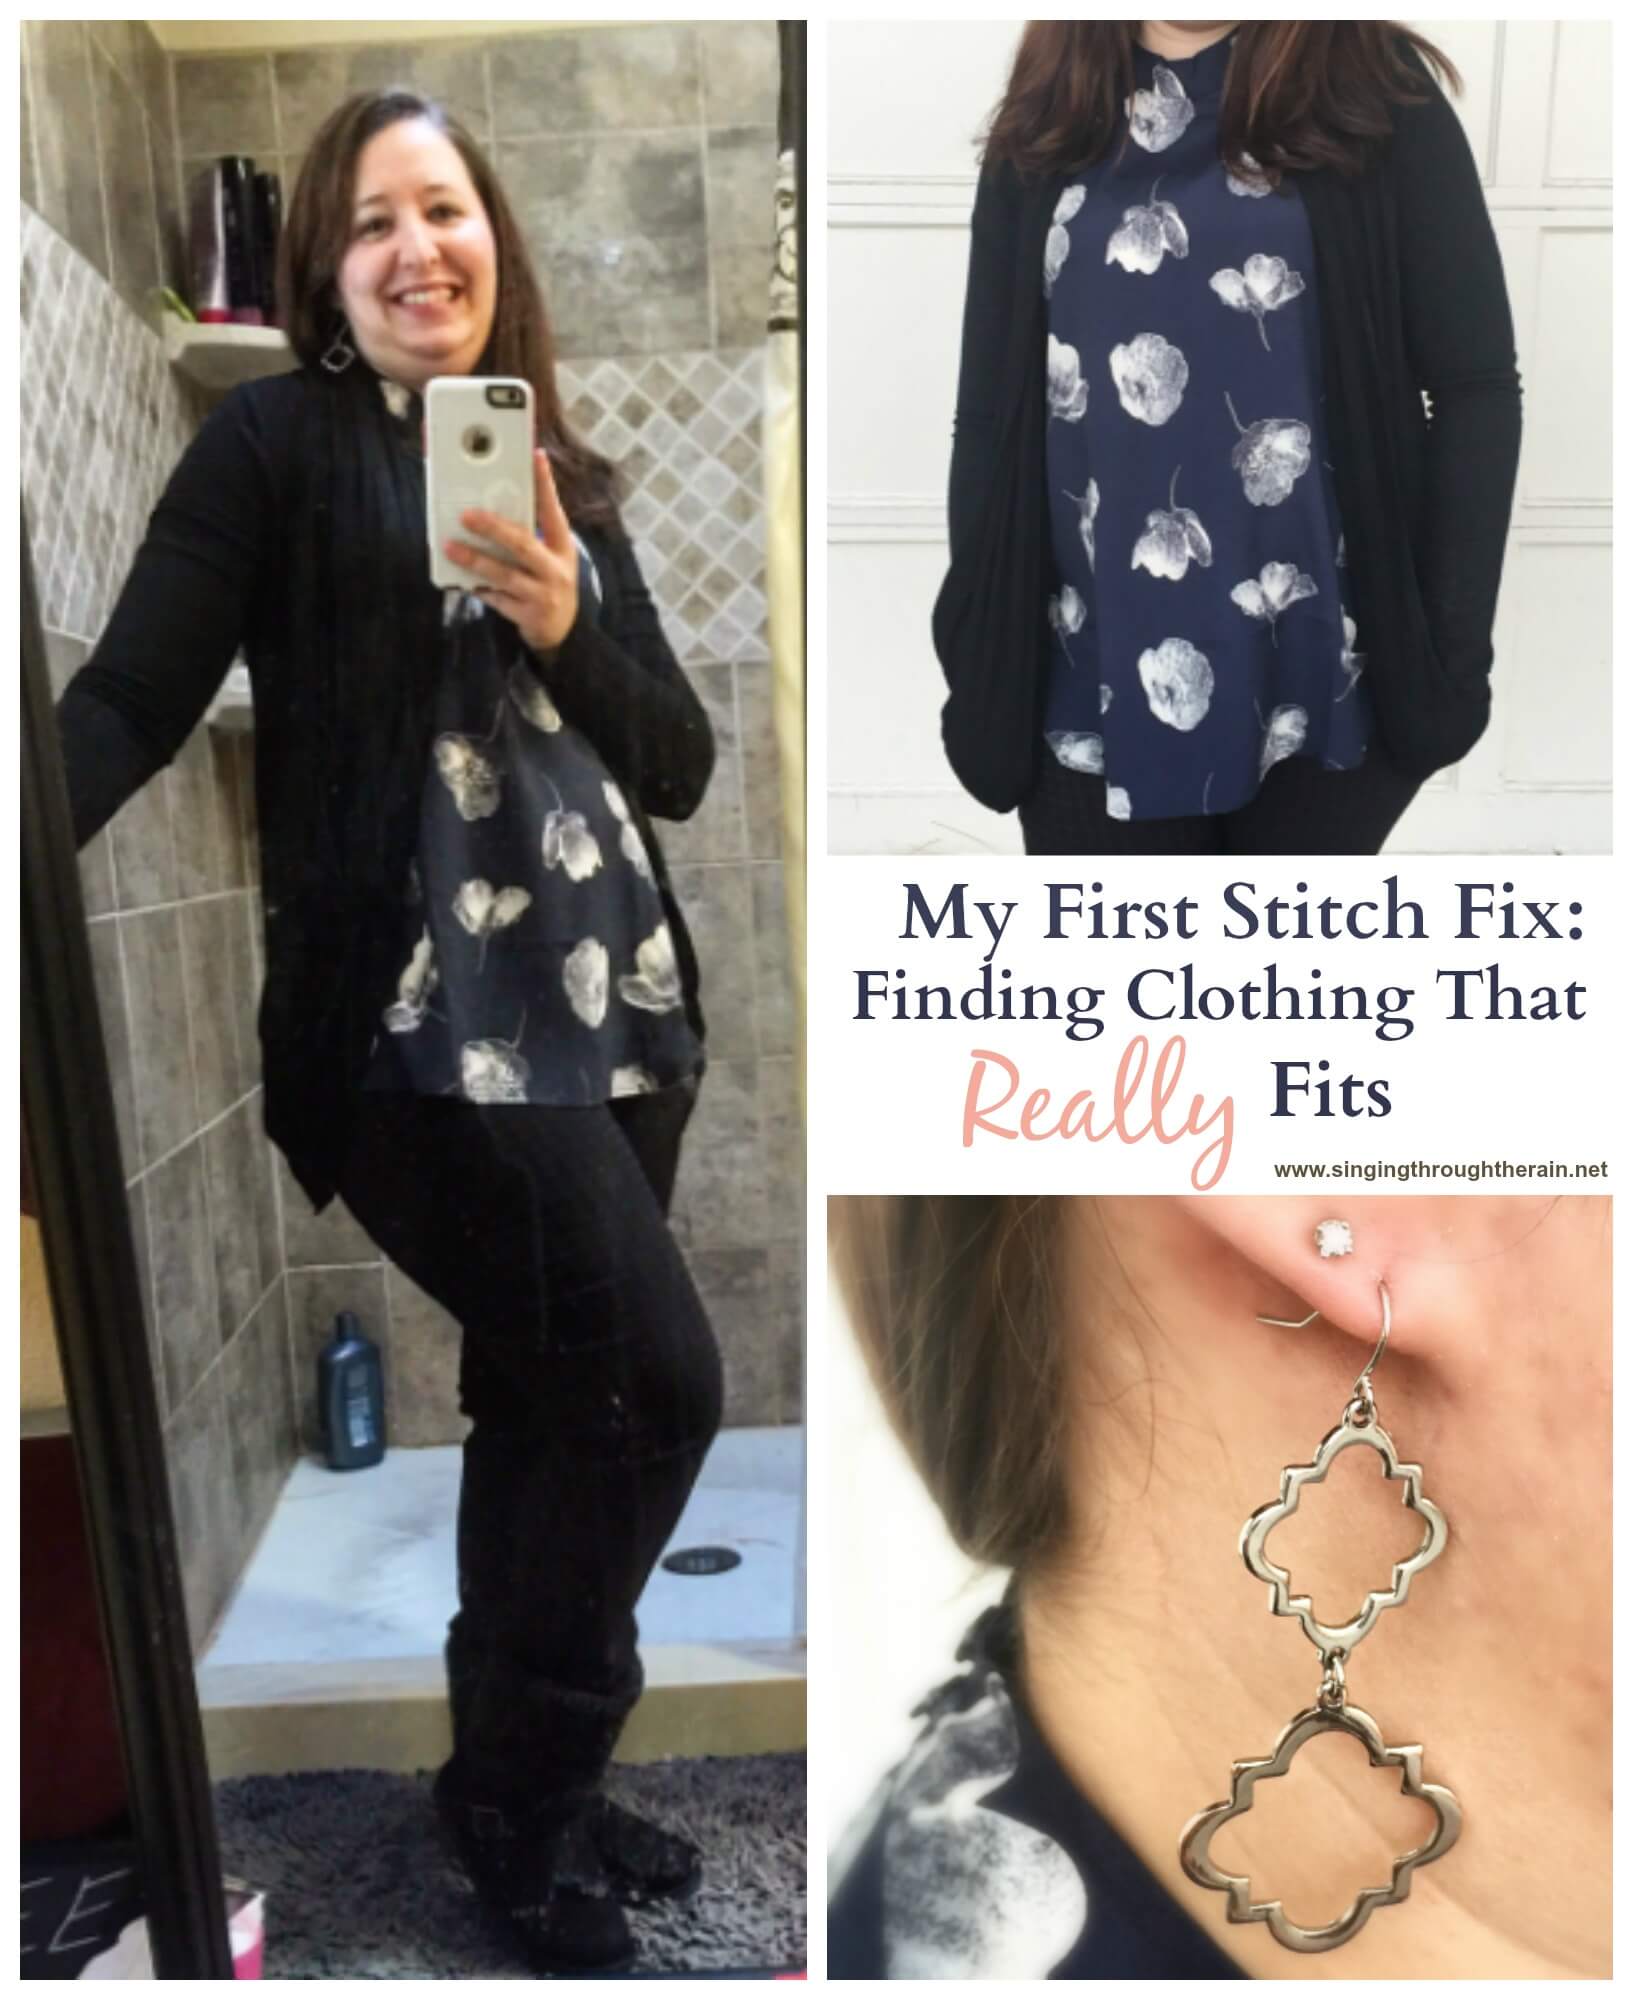 My First Stitch Fix: Finding Clothing That Really Fits!